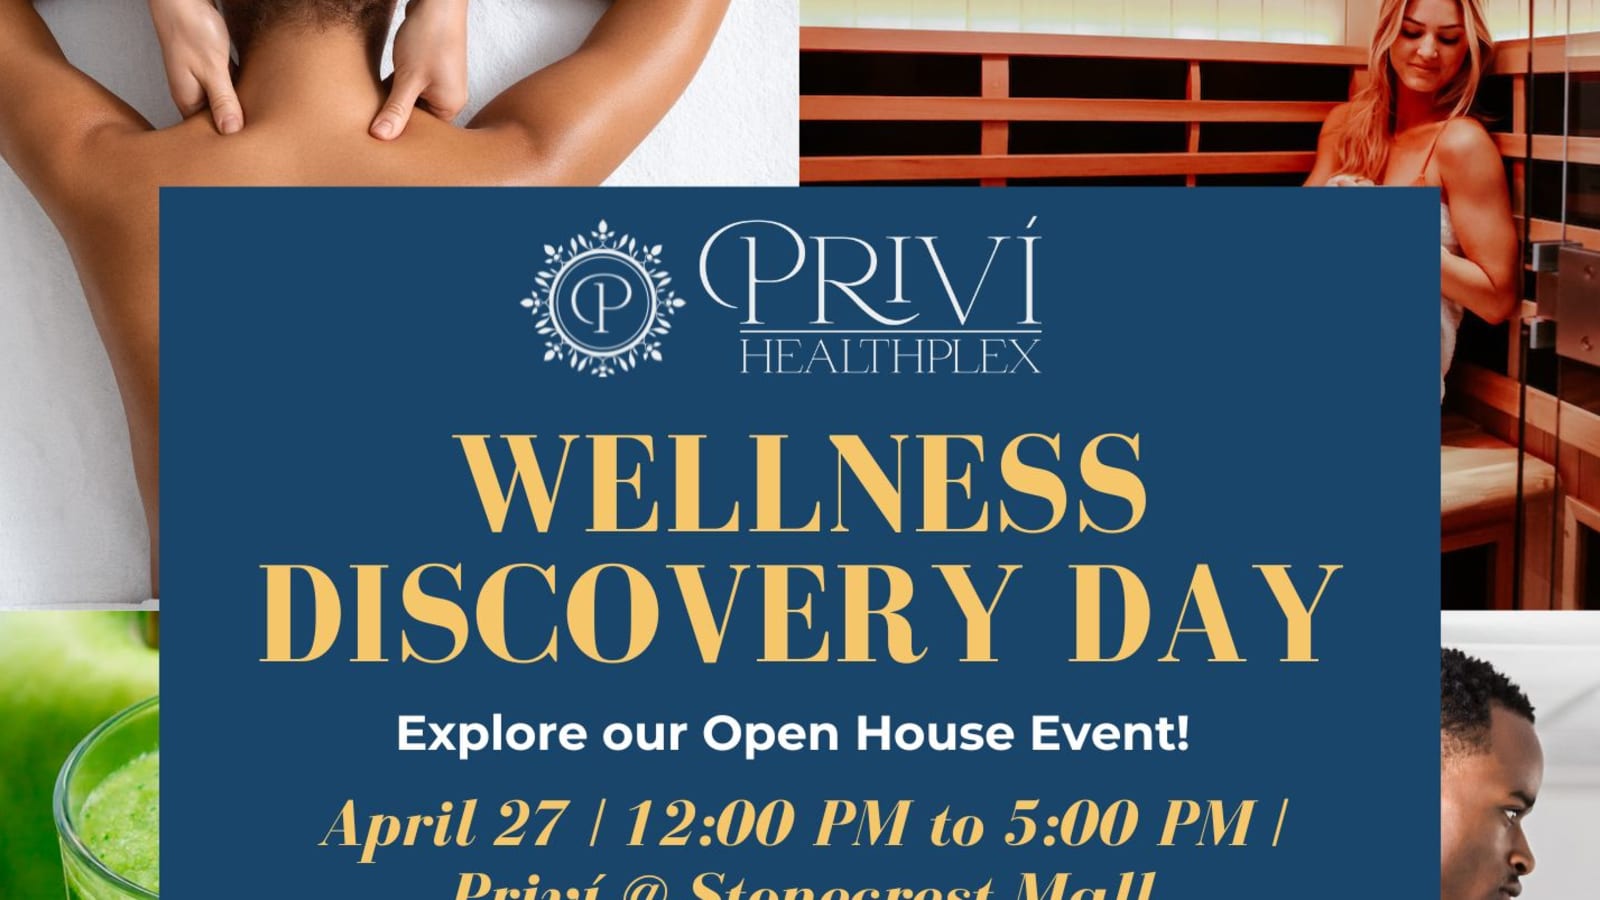 Wellness Discovery Day at Privi Healthplex